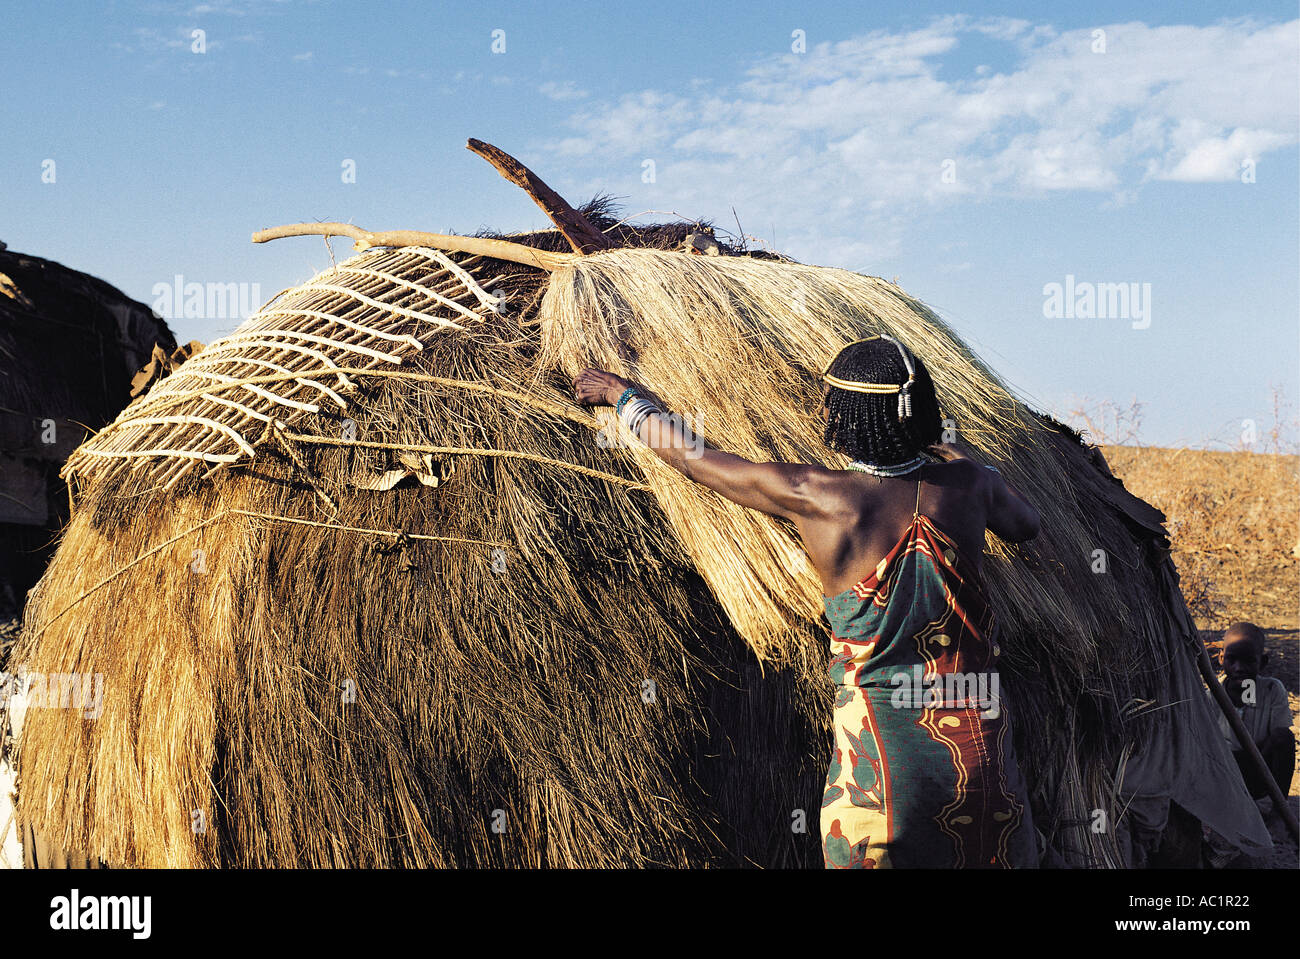 Gabbra married woman placing a sisal mat that she has just finished weaving on the roof of her hut Stock Photo